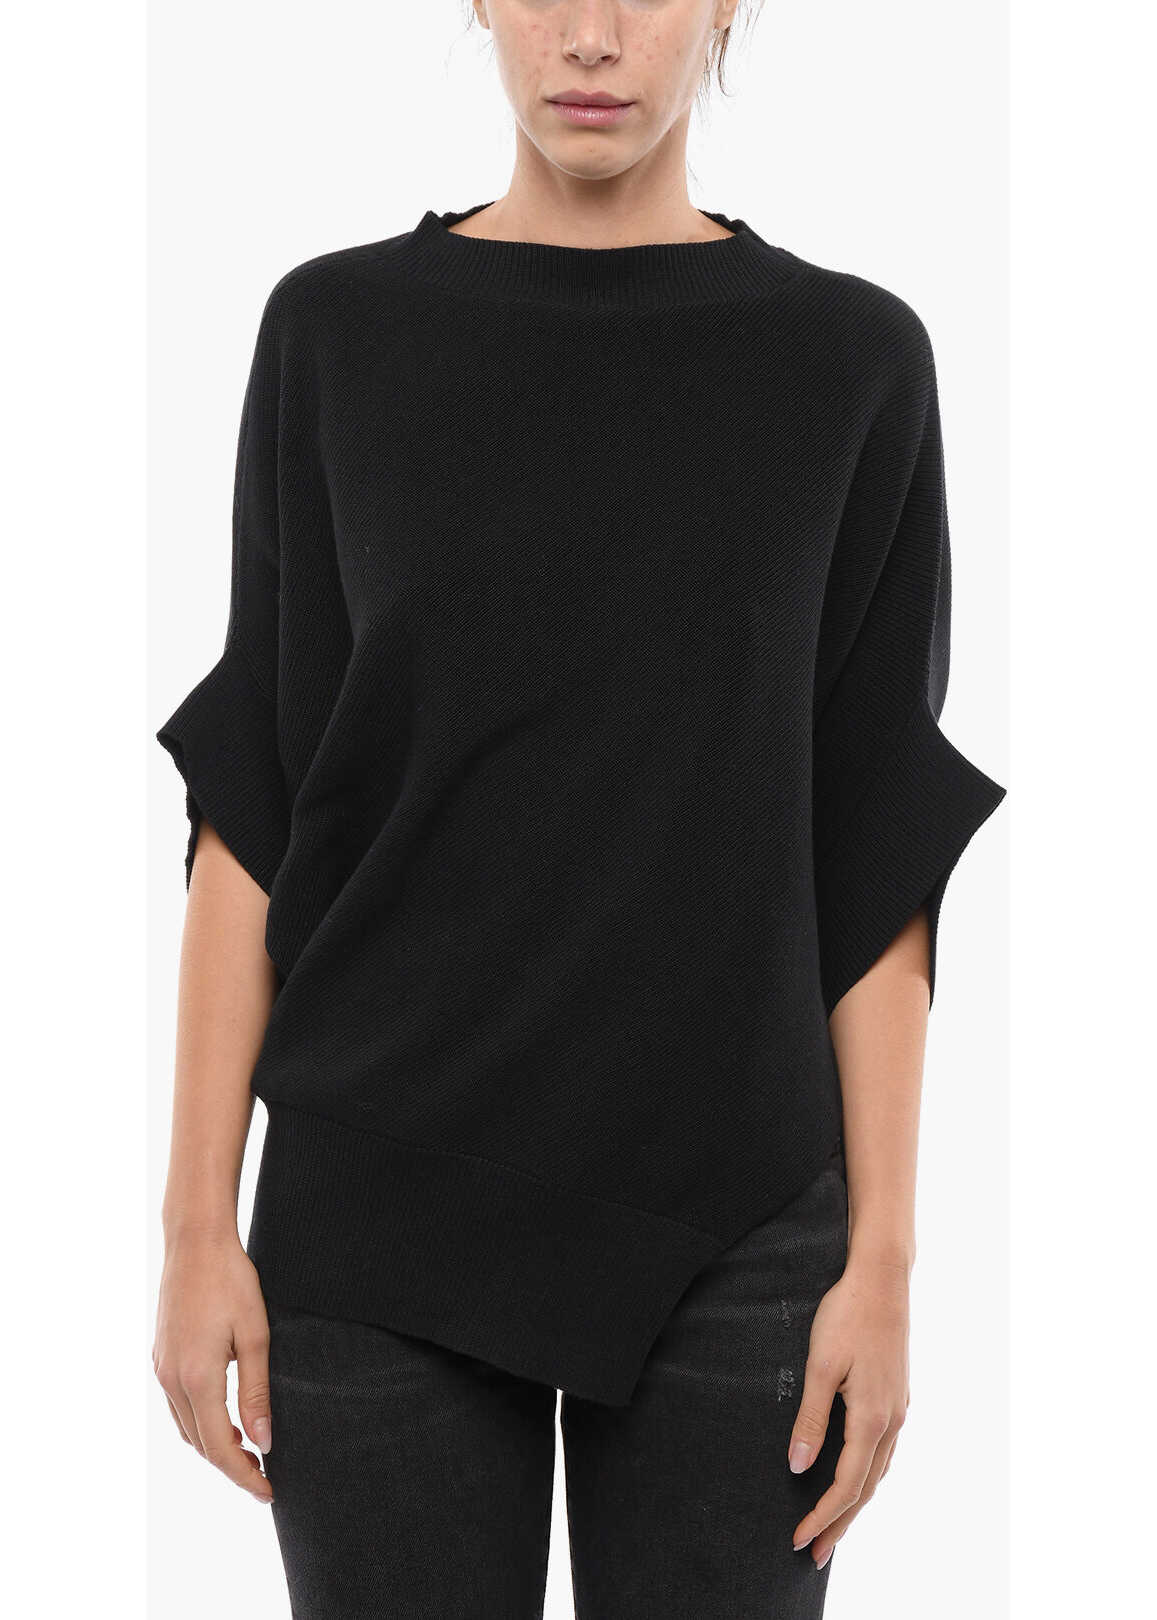 Sacai Cotton Blend Asymmetrical Sweater With Bat-Wing Sleeves Black